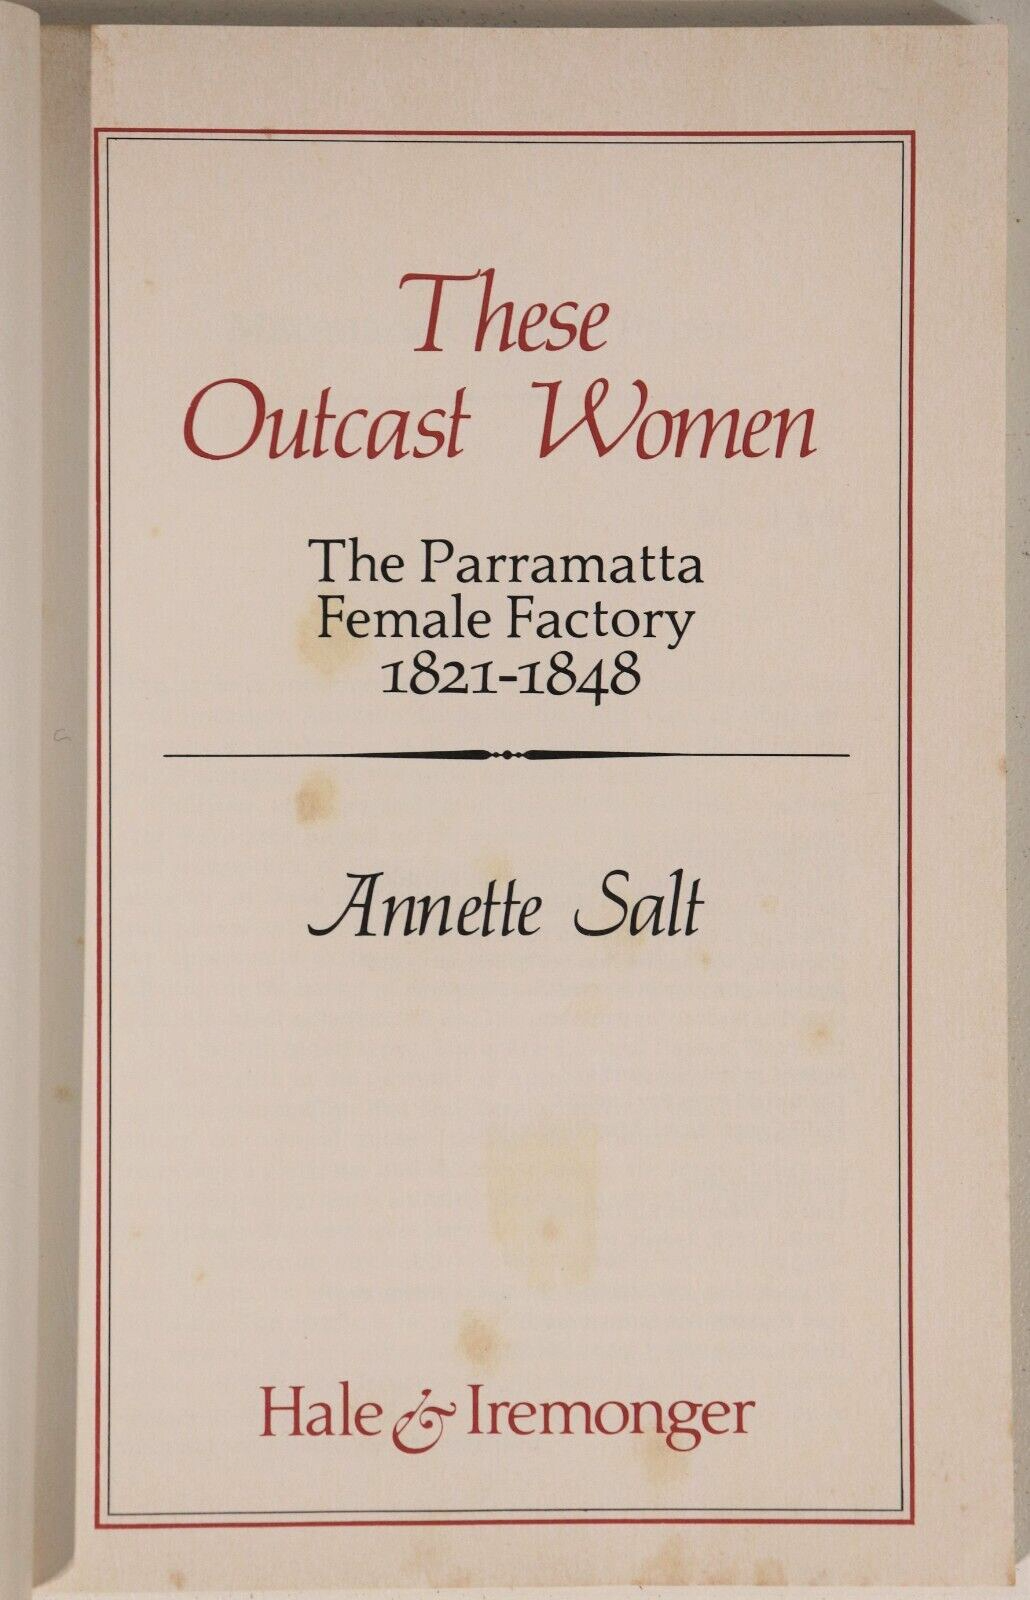 These Outcast Women by Annette Salt - 1984 - Australian Colonial History Book - 0